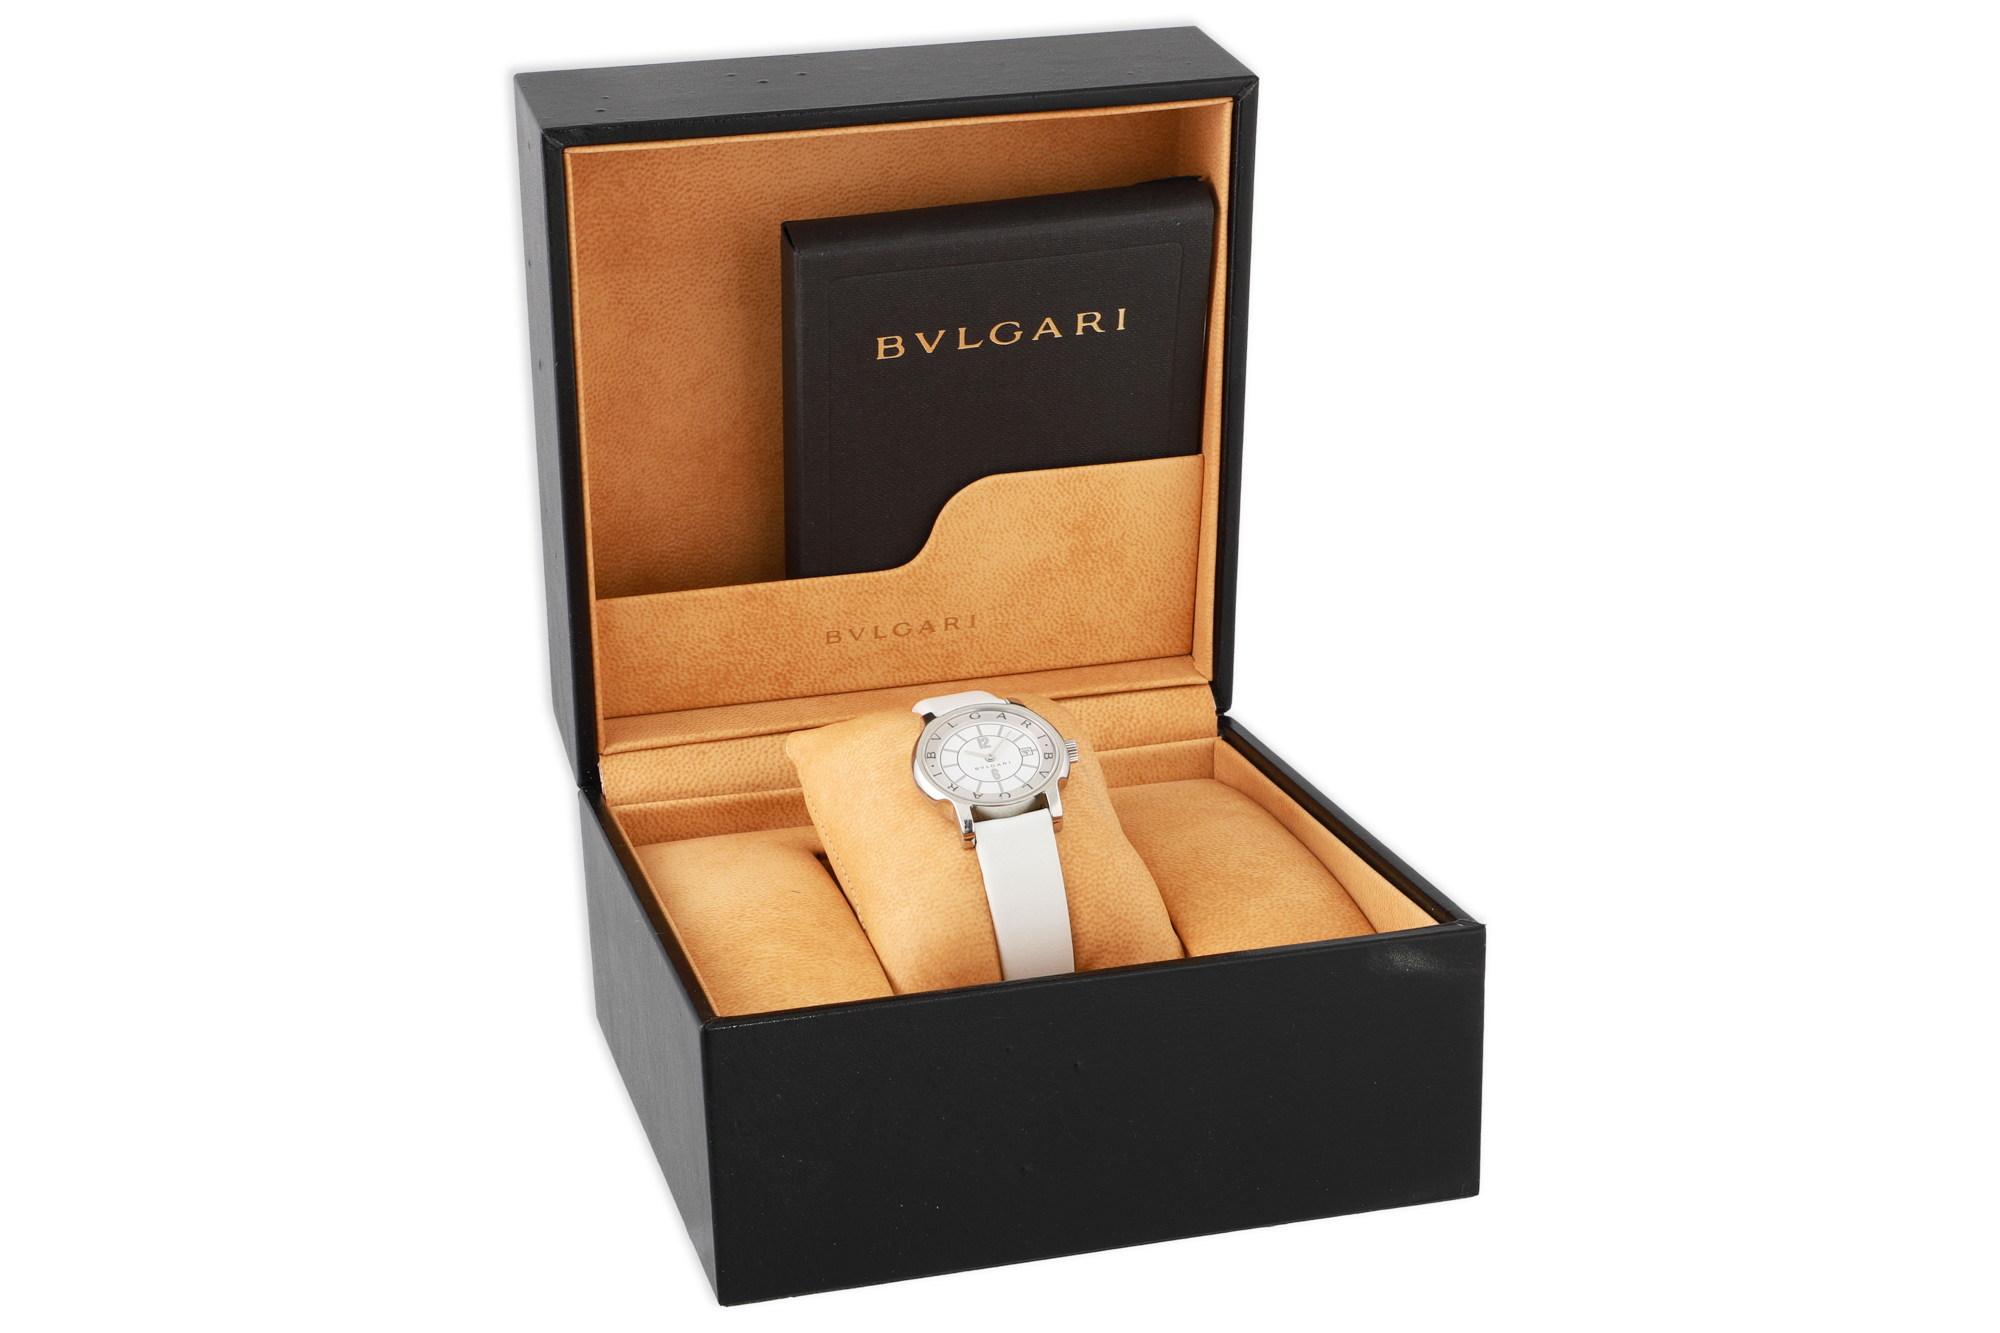 A BULGARI LADY'S WRISTWATCH, "Solotempo" Bulgari buckle, later white strap, box & 2008 papers - Image 2 of 2